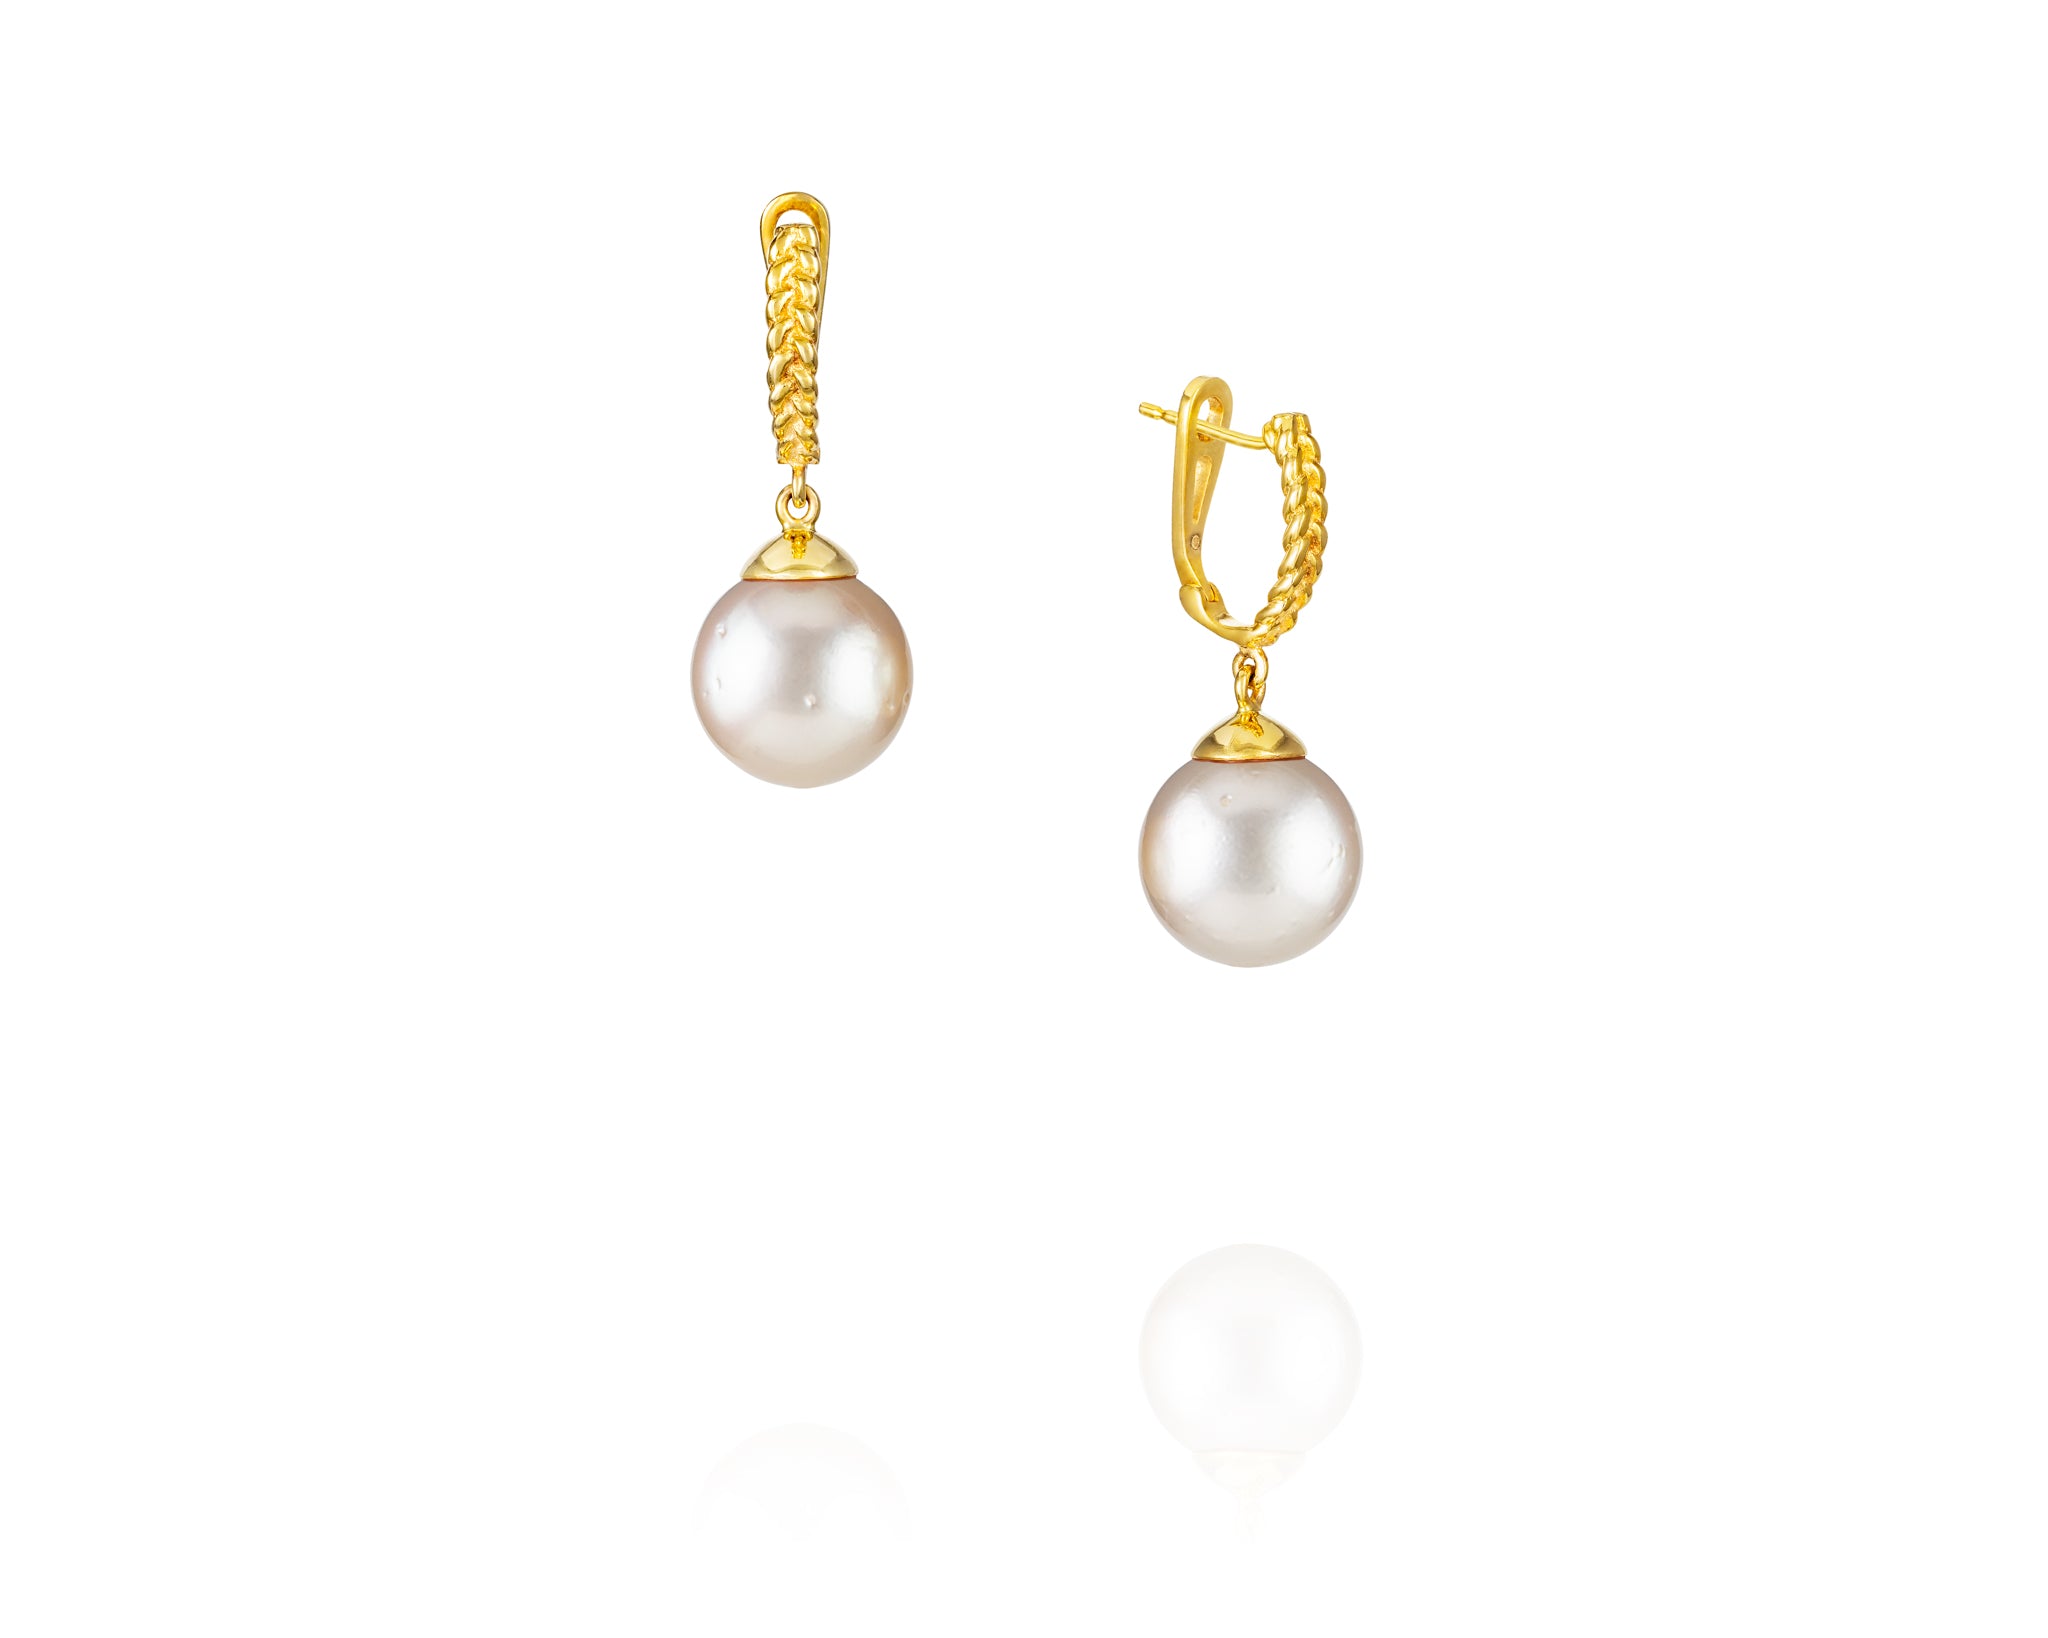 White South Sea Gold Drop Earrings – Vincent Peach Fine Jewelry